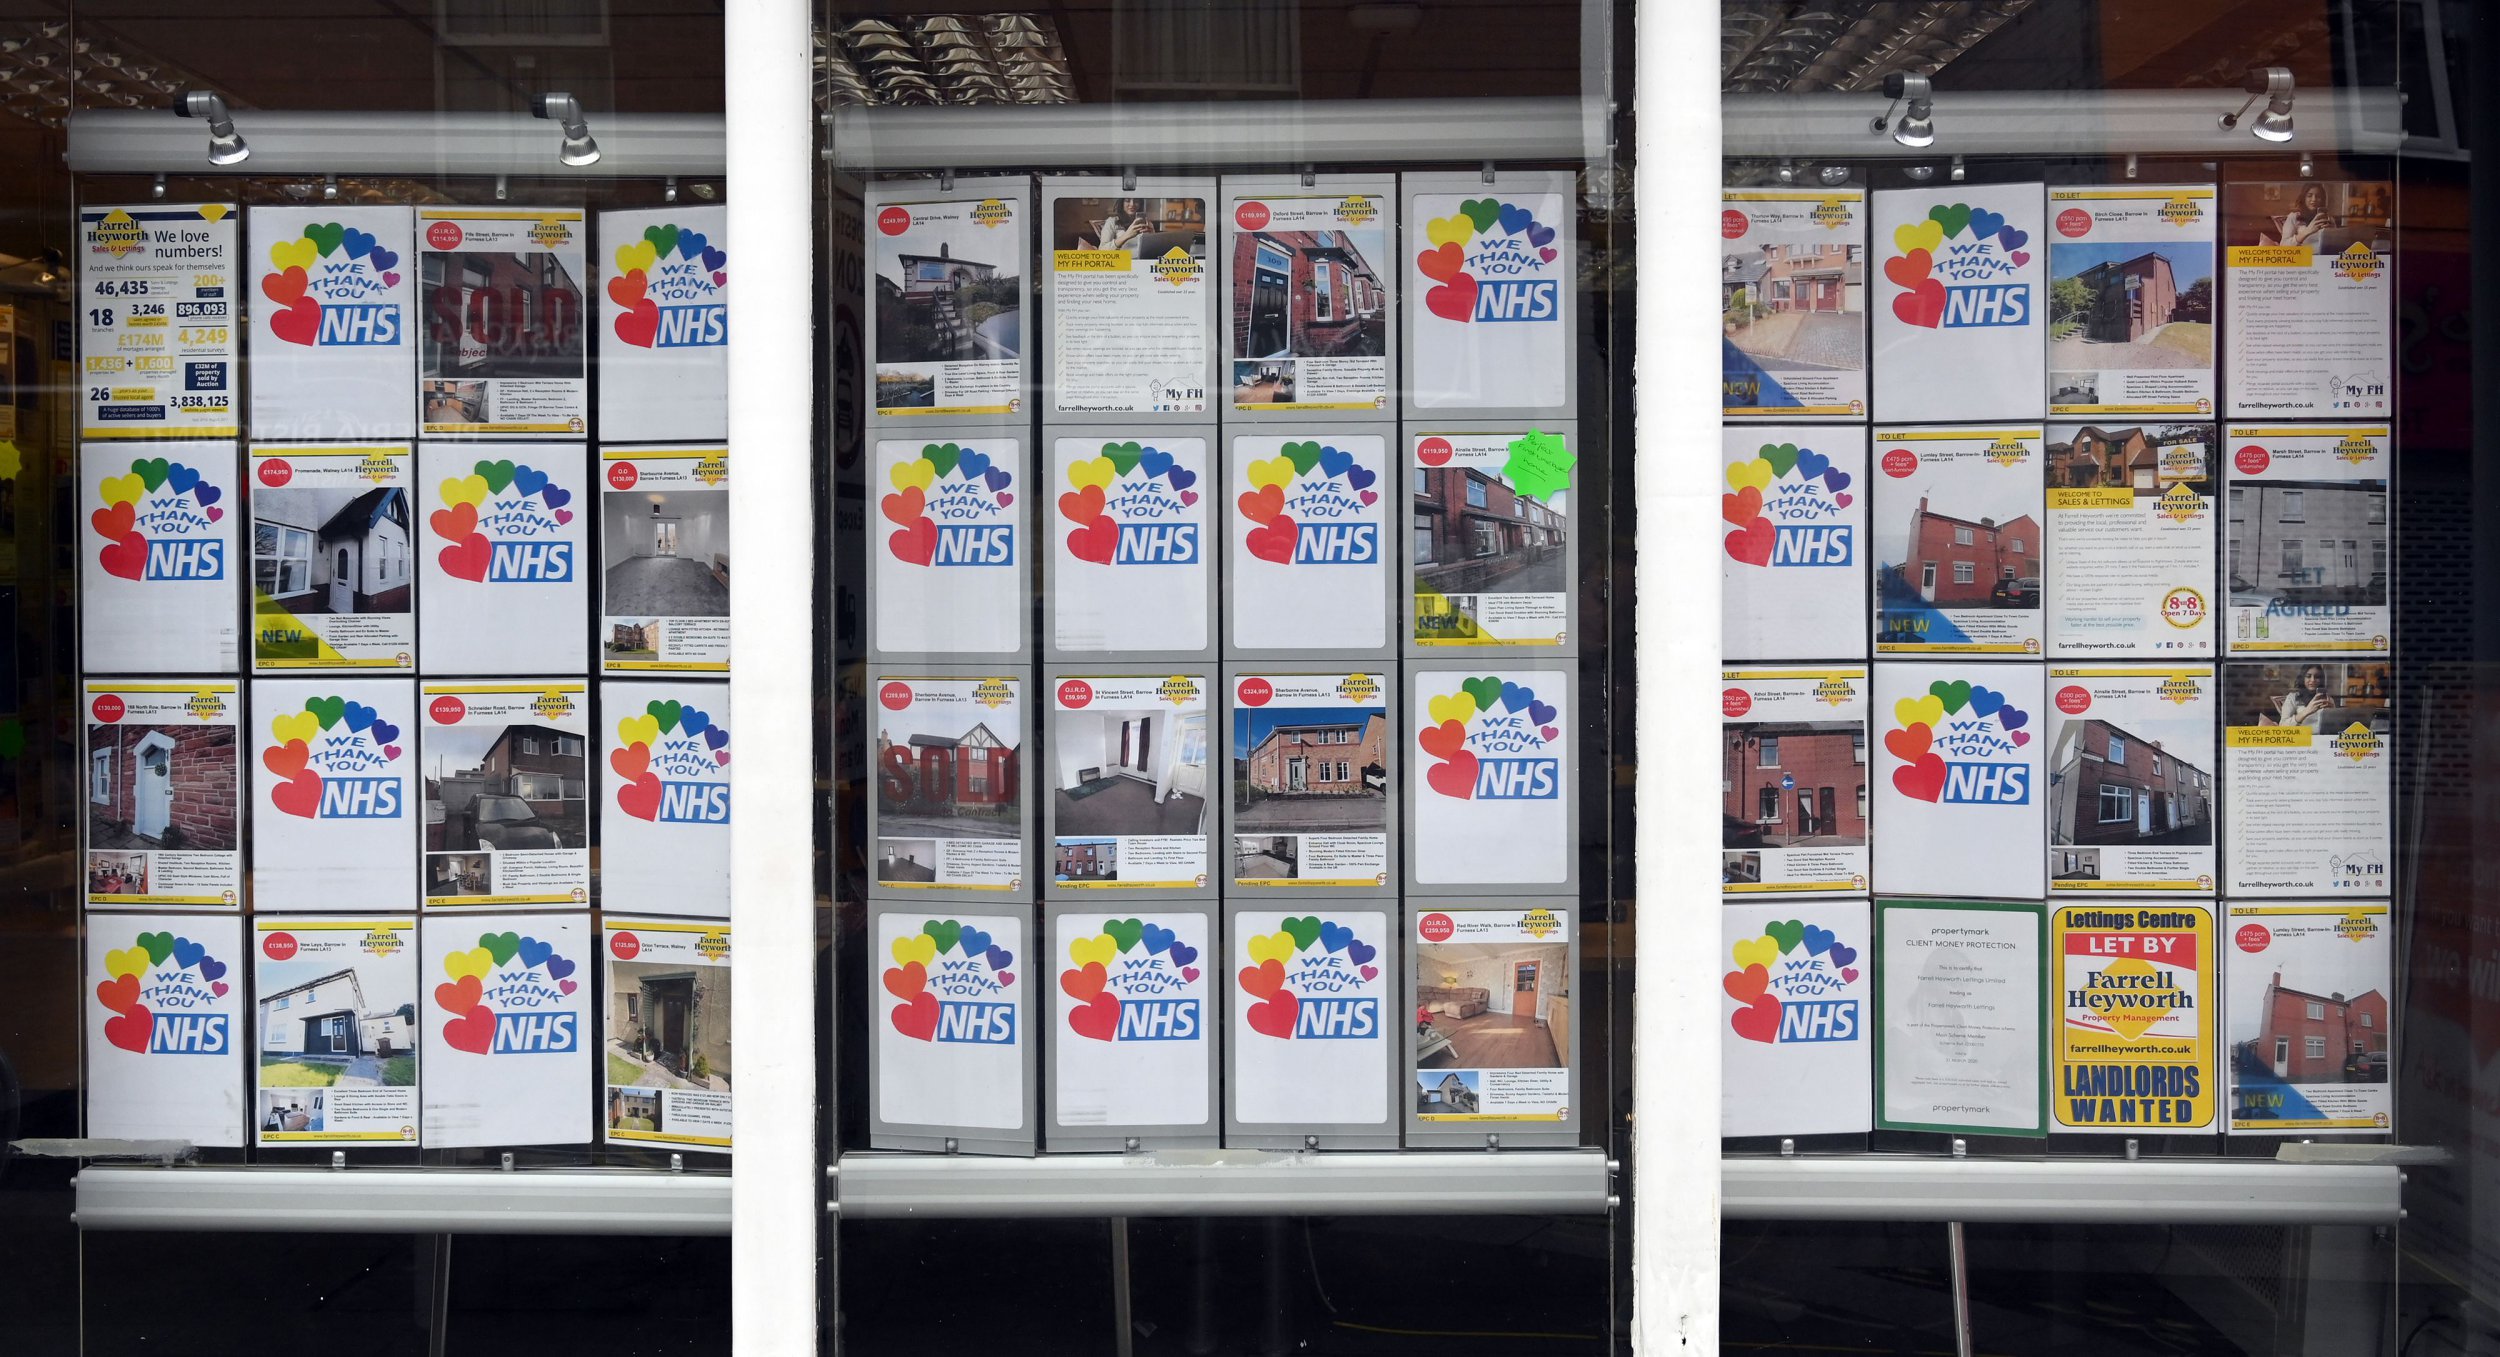 Messages of thanks for the workers of Britain's NHS (National Health Service), are pictured alongside images of houses and residential properties for sale, in the window of an estate agents' shop in Barrow-in-Furness, north west England on May 18, 2020. - As of Monday, Barrow-in-Furness had three times the England and Wales average for the number of coronavirus diagnoses. British health officials added loss of taste and smell to their coronavirus symptoms list on Monday after experts warned cases were being missed. (Photo by PAUL ELLIS / AFP) (Photo by PAUL ELLIS/AFP via Getty Images)